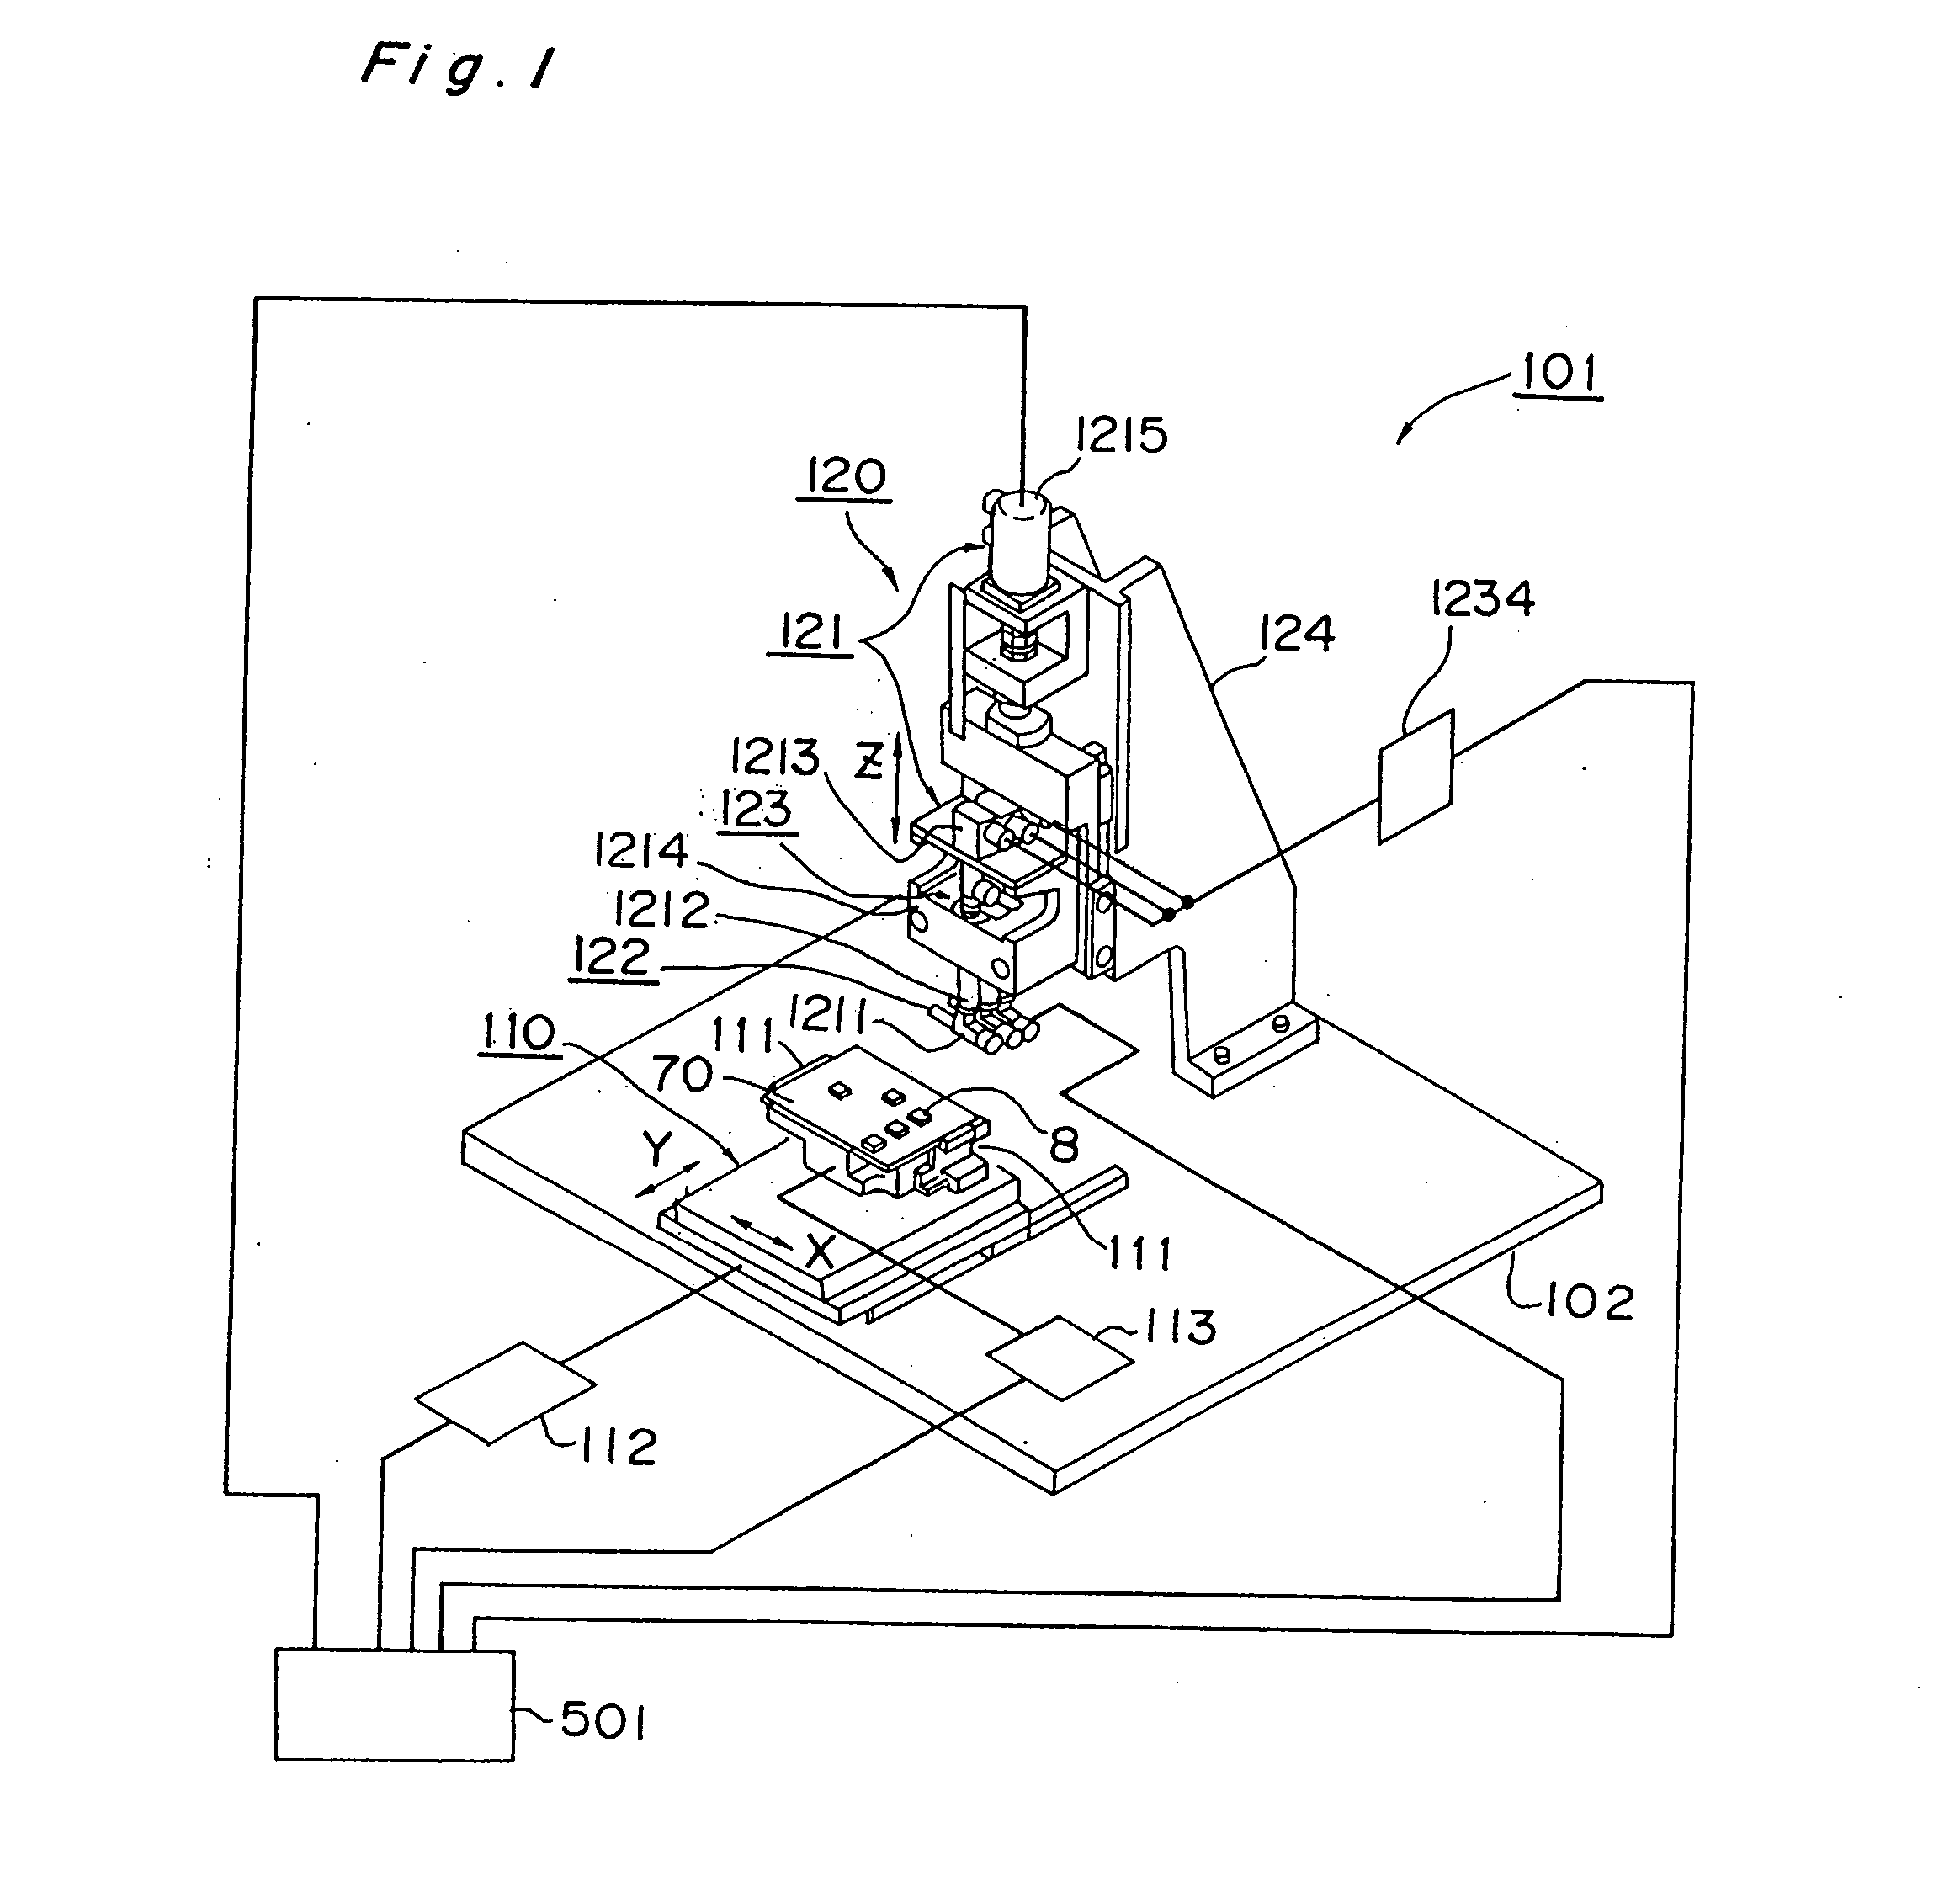 Heating and pressurizing apparatus for use in mounting electronic components, and apparatus and method for mounting electronic components